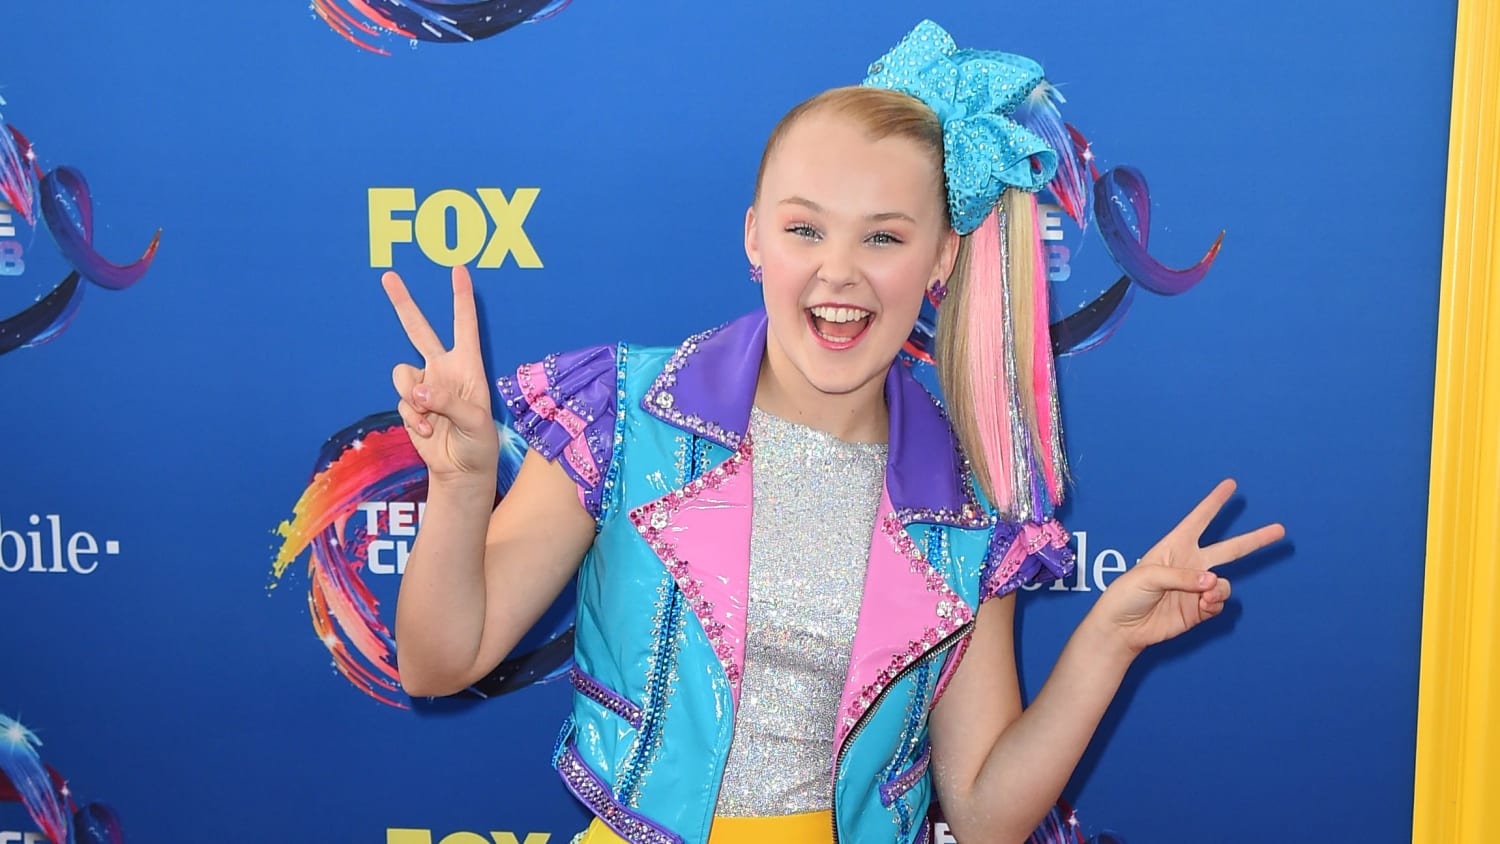 Everything you should know about JoJo Siwa, the 'Dance Moms' alum turned teen Internet star